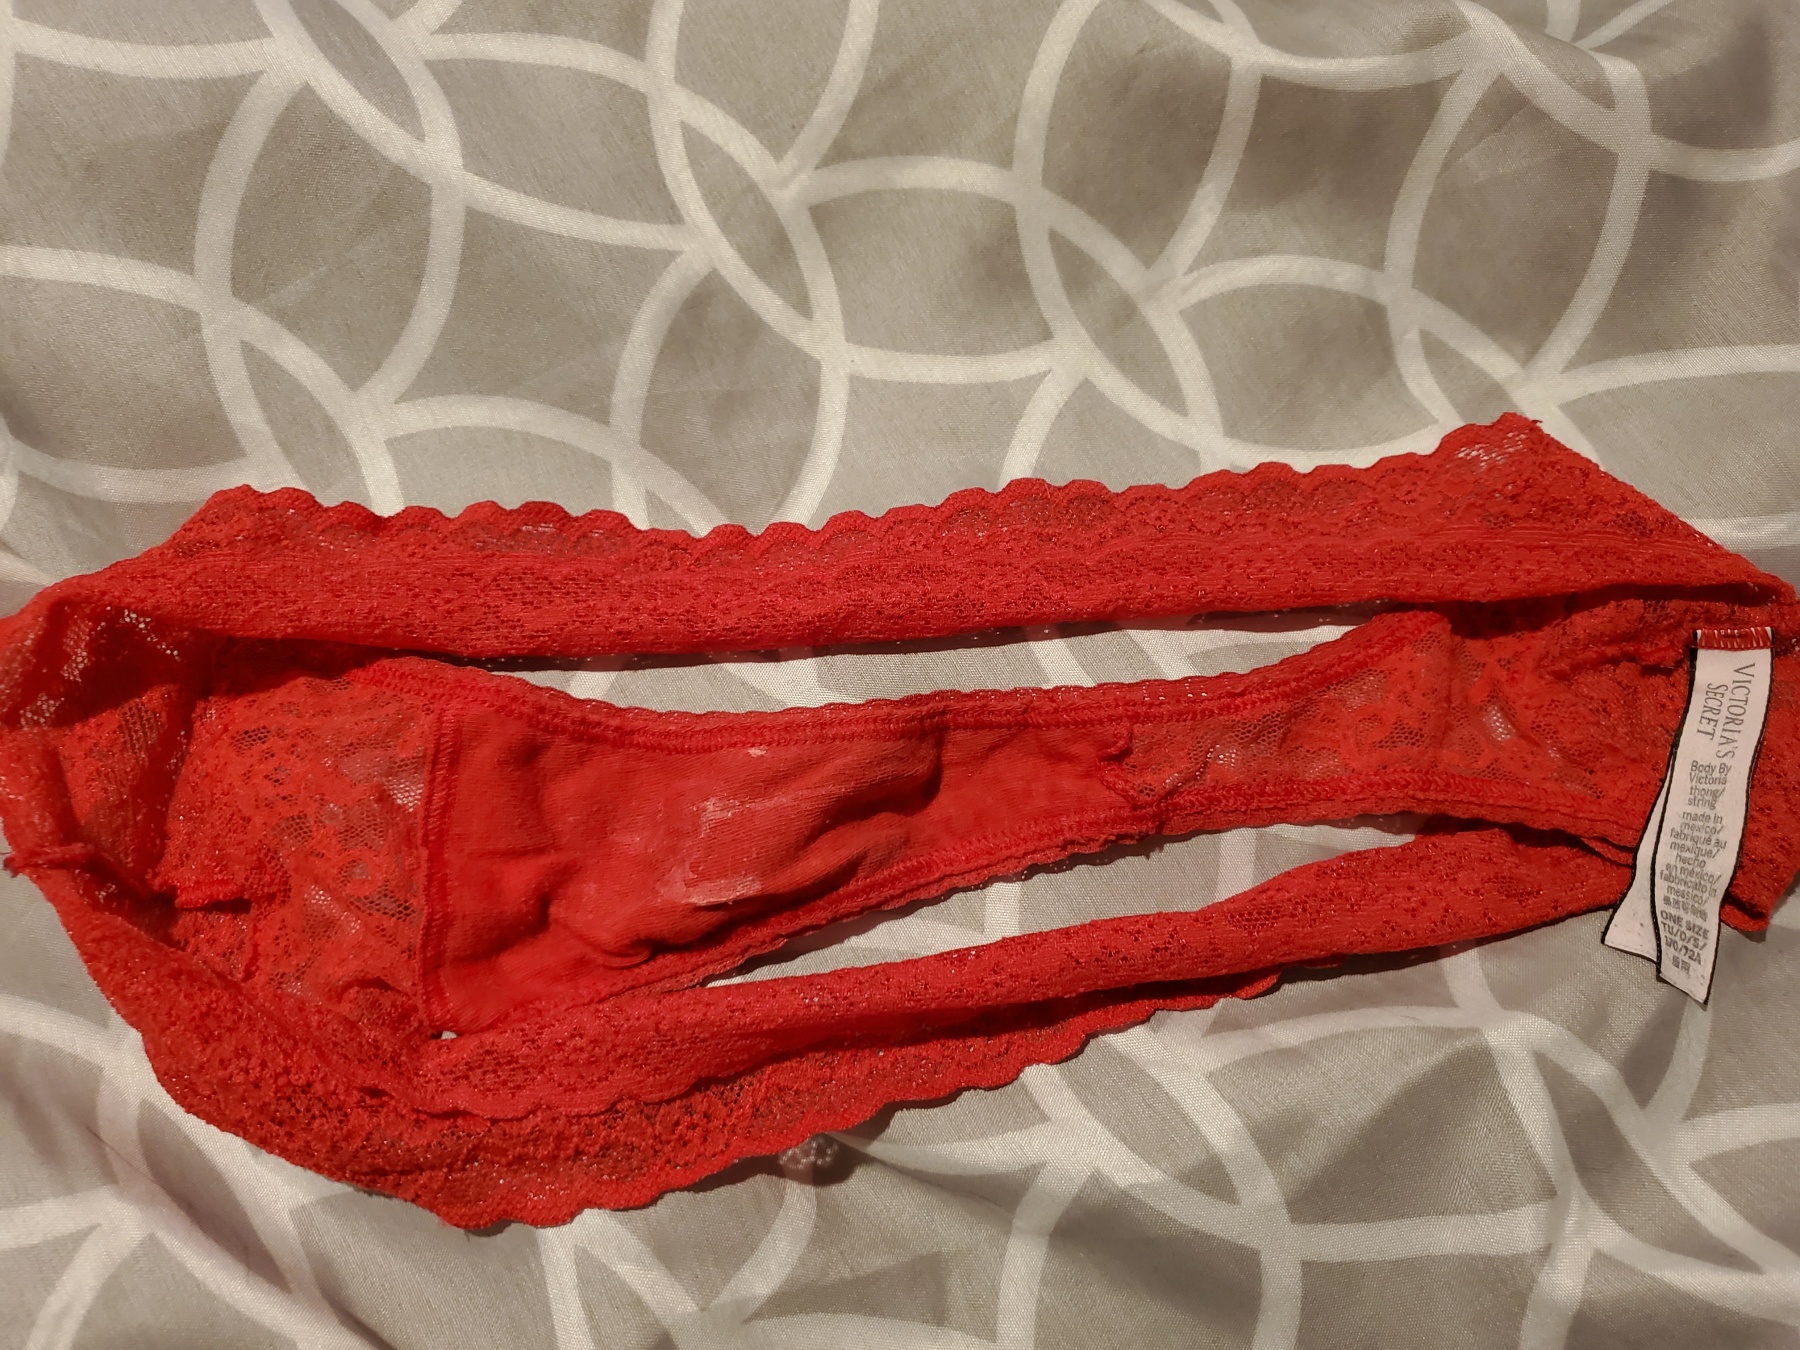 Creamed Stained Thong Myusedpantystorecom